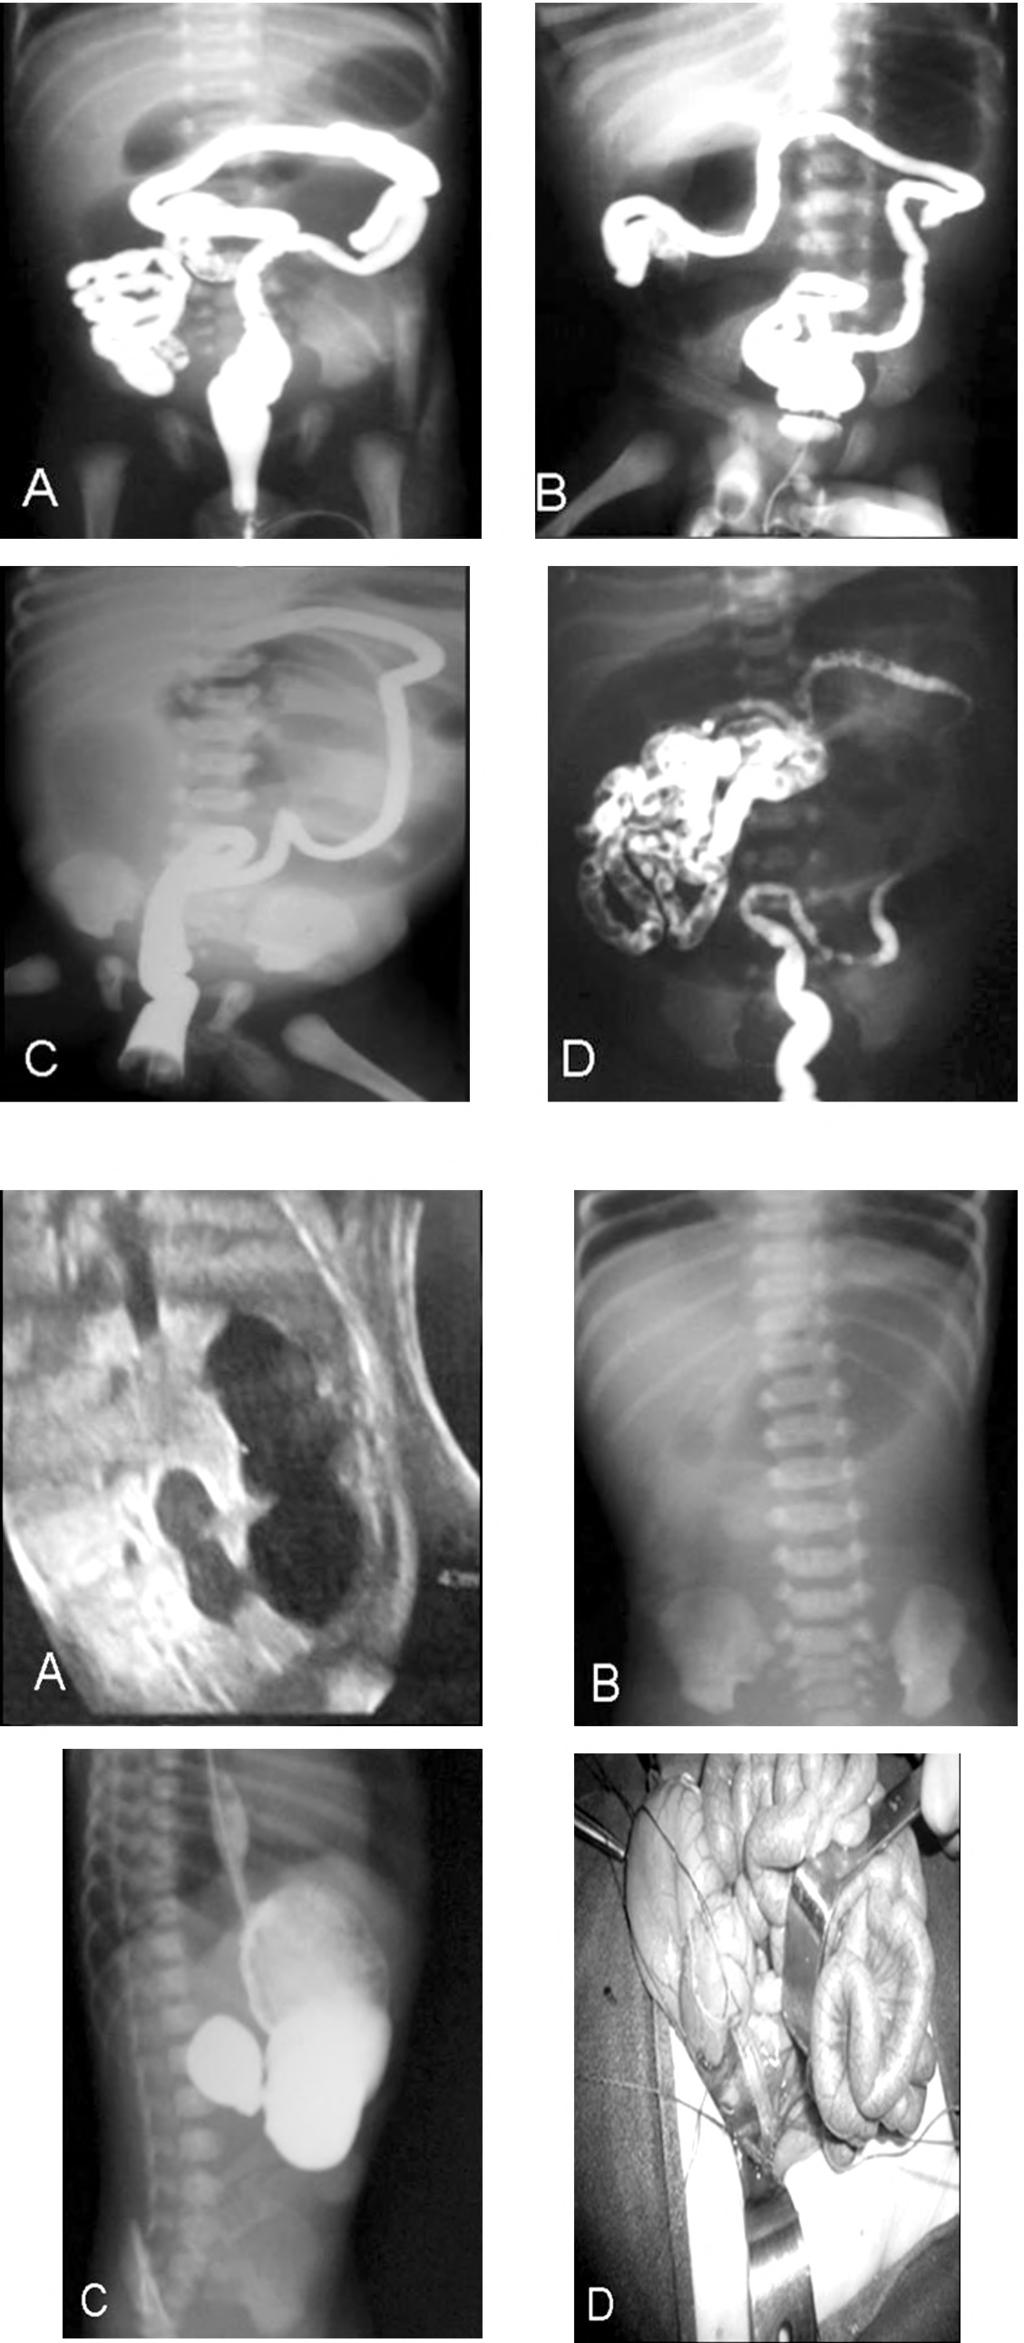 210 Imaging of Neonatal Upper Gastro-Intestinal Atresia Beyond the Esophagus For cases with jejuno-ileal atresia, primary anastomosis was used in all cases aimed to minimize bowel loss with sequences